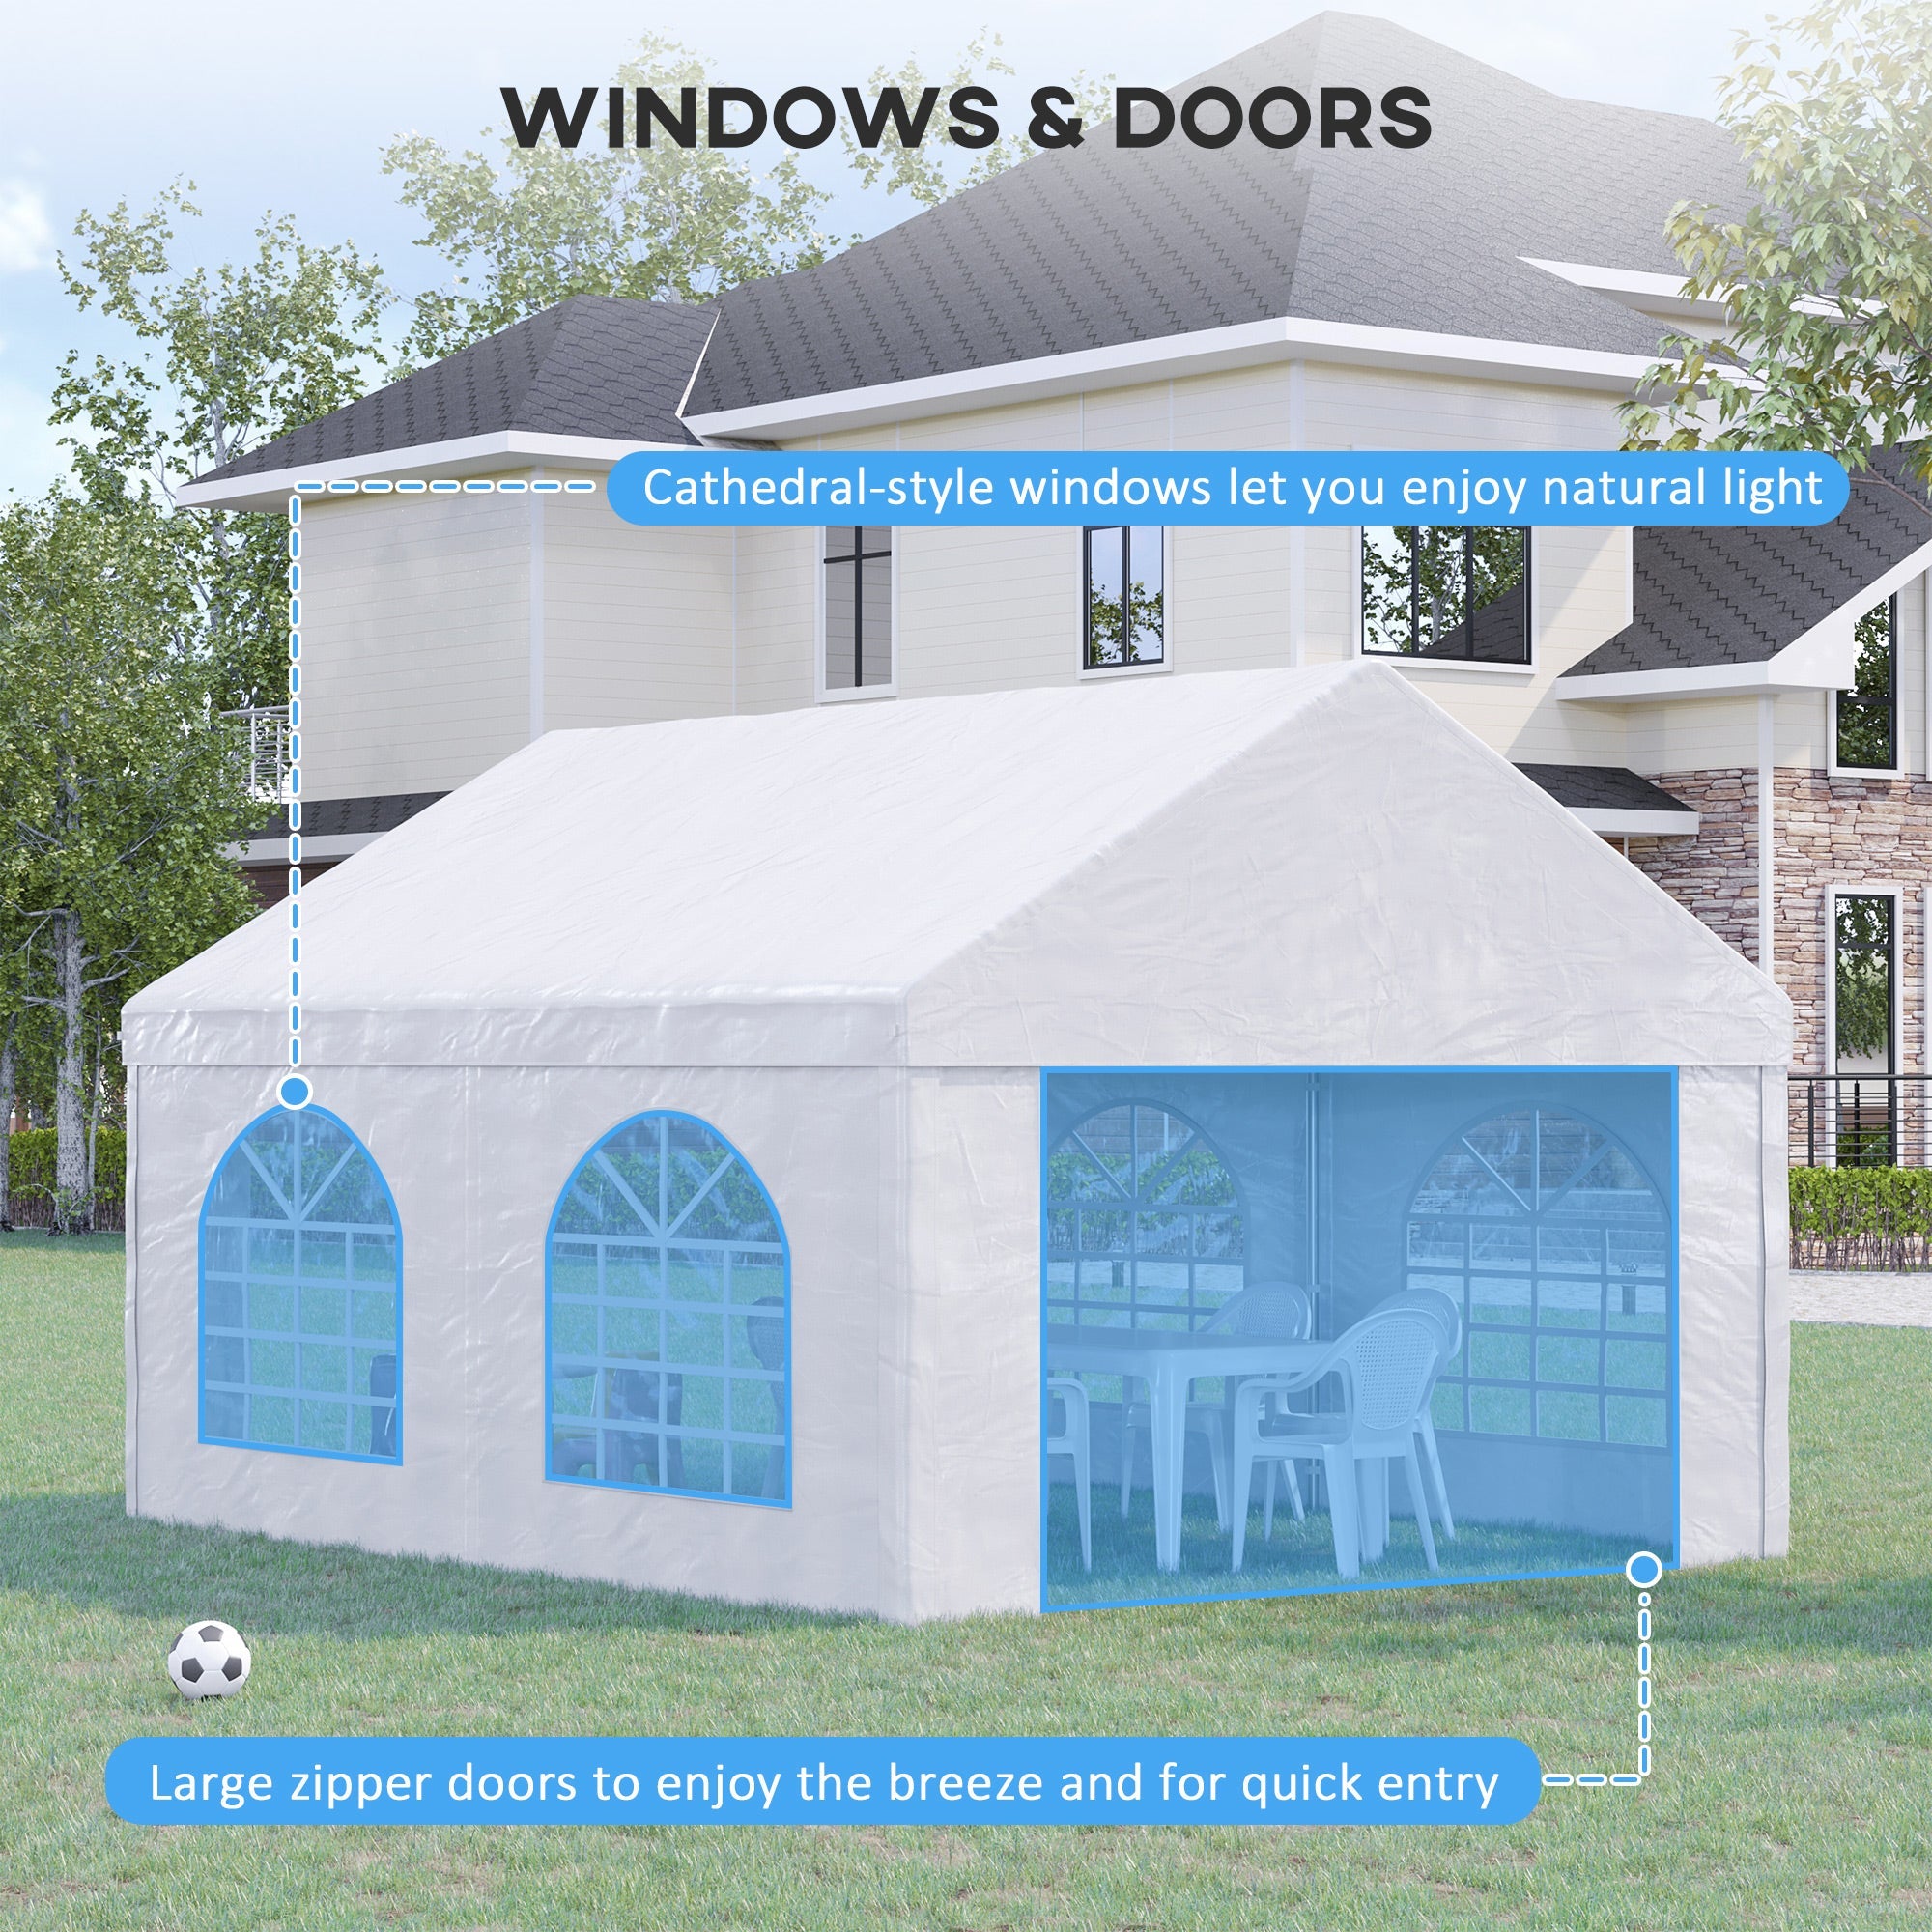 Outsunny 13' x 16' Party Tent Carport with Removable Sidewalls, Windows and Double Doors, Heavy Duty Canopy Tent Sun Shade Shelter, for Parties, Wedding, Outdoor Events, BBQ